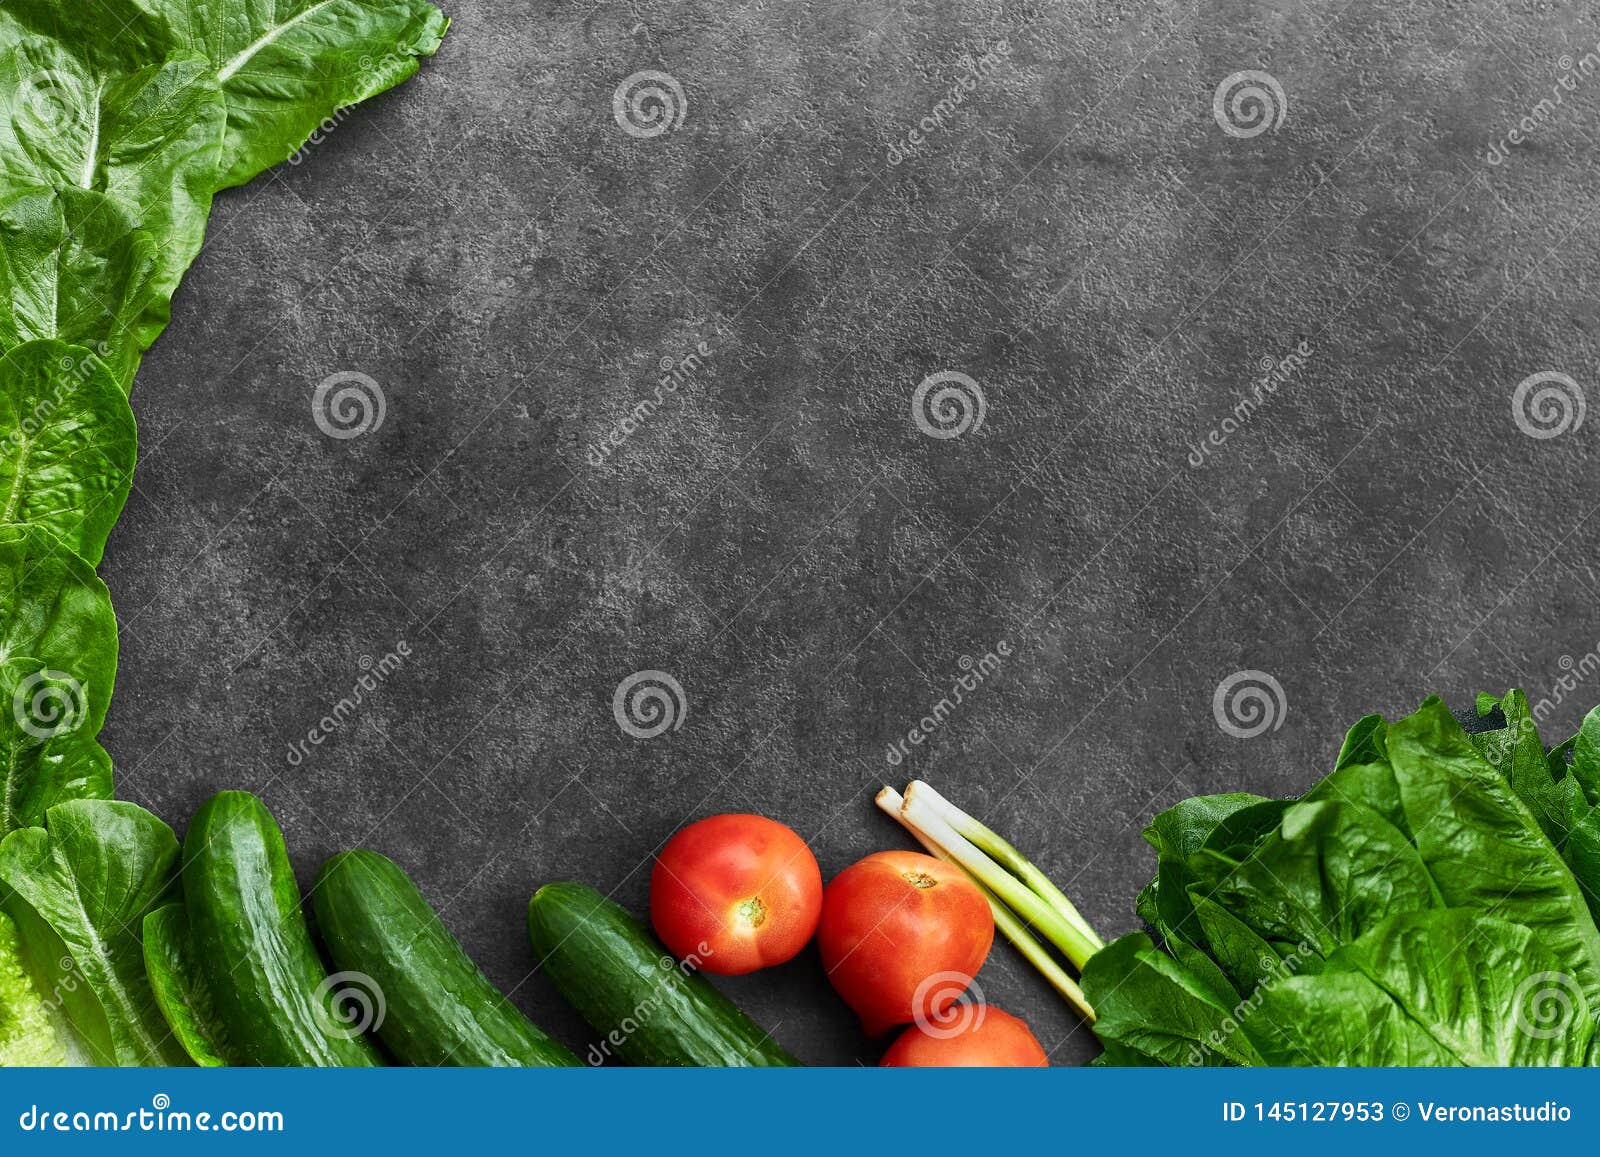 set of raw organic food, vegetables with fresh ingredients for healthily cooking on black  background, top view, banner. vegan or